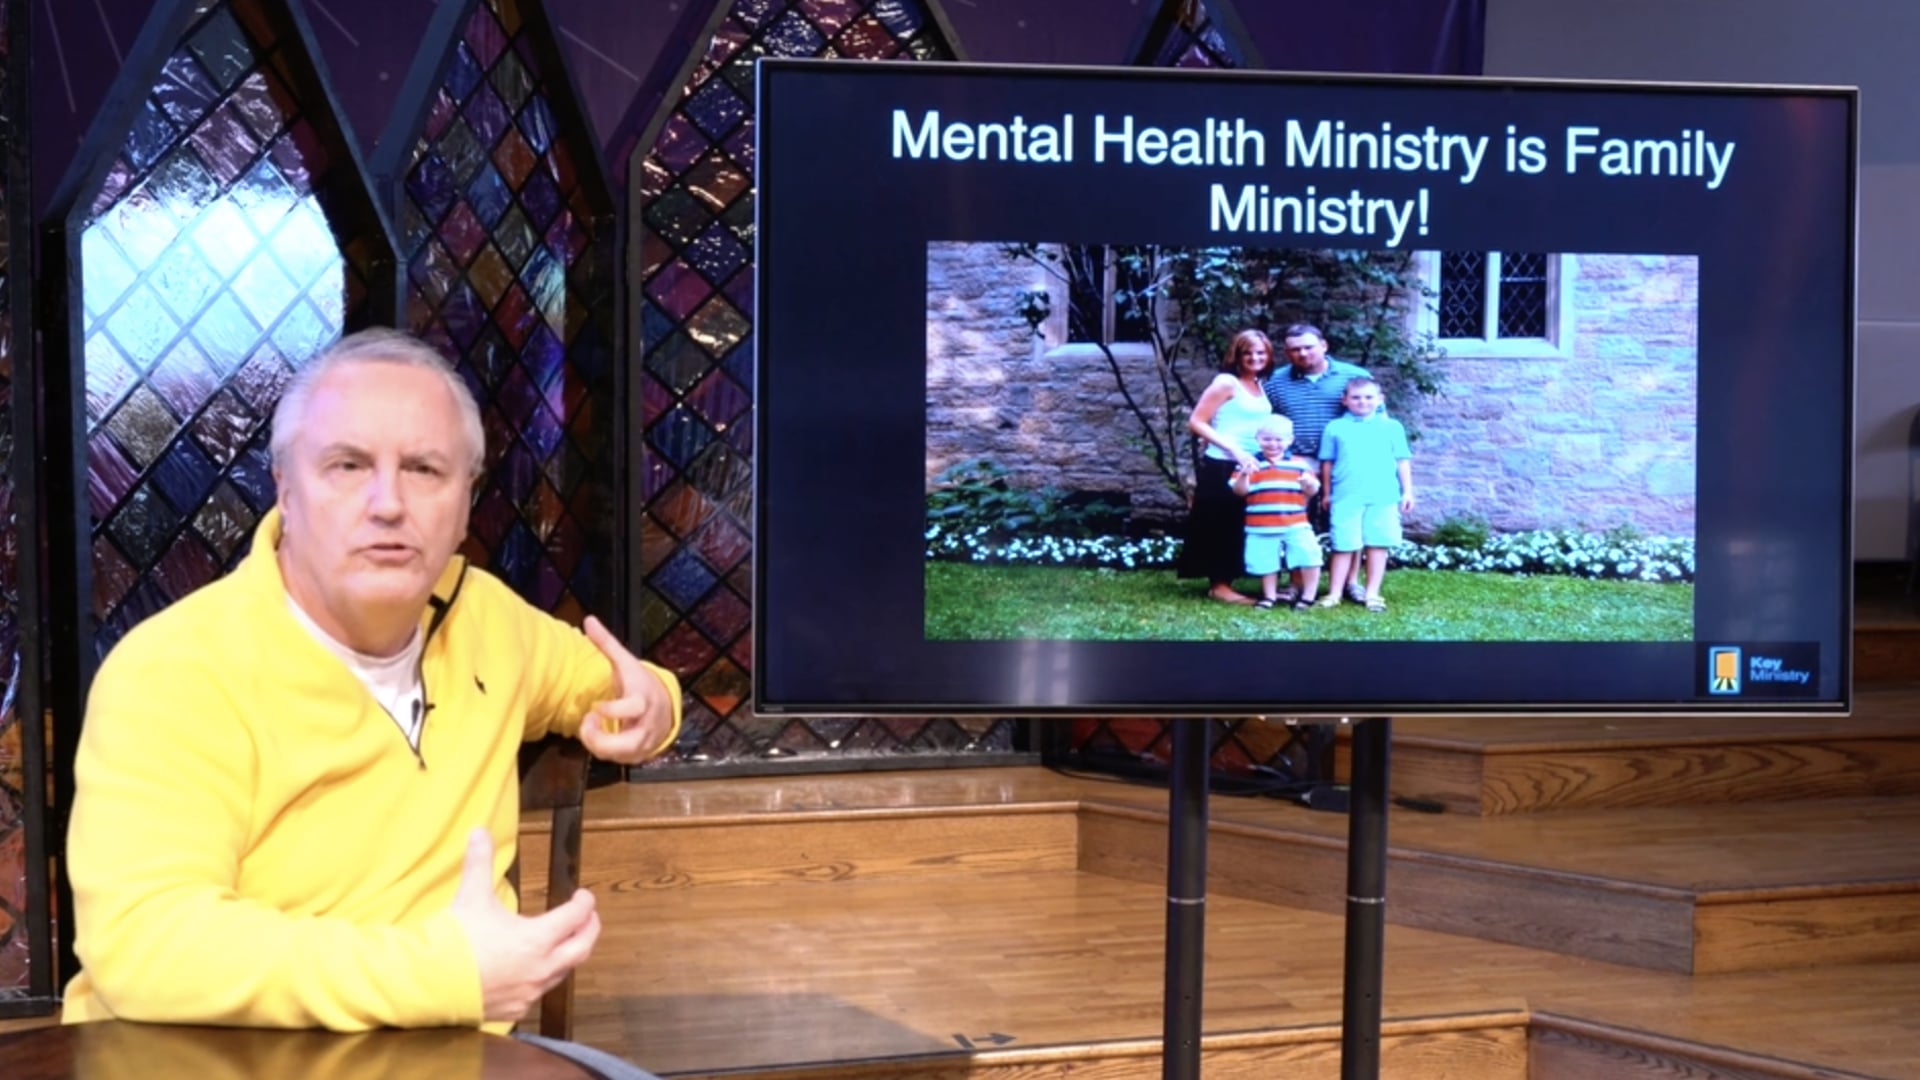 man talks about mental health and family ministry in church